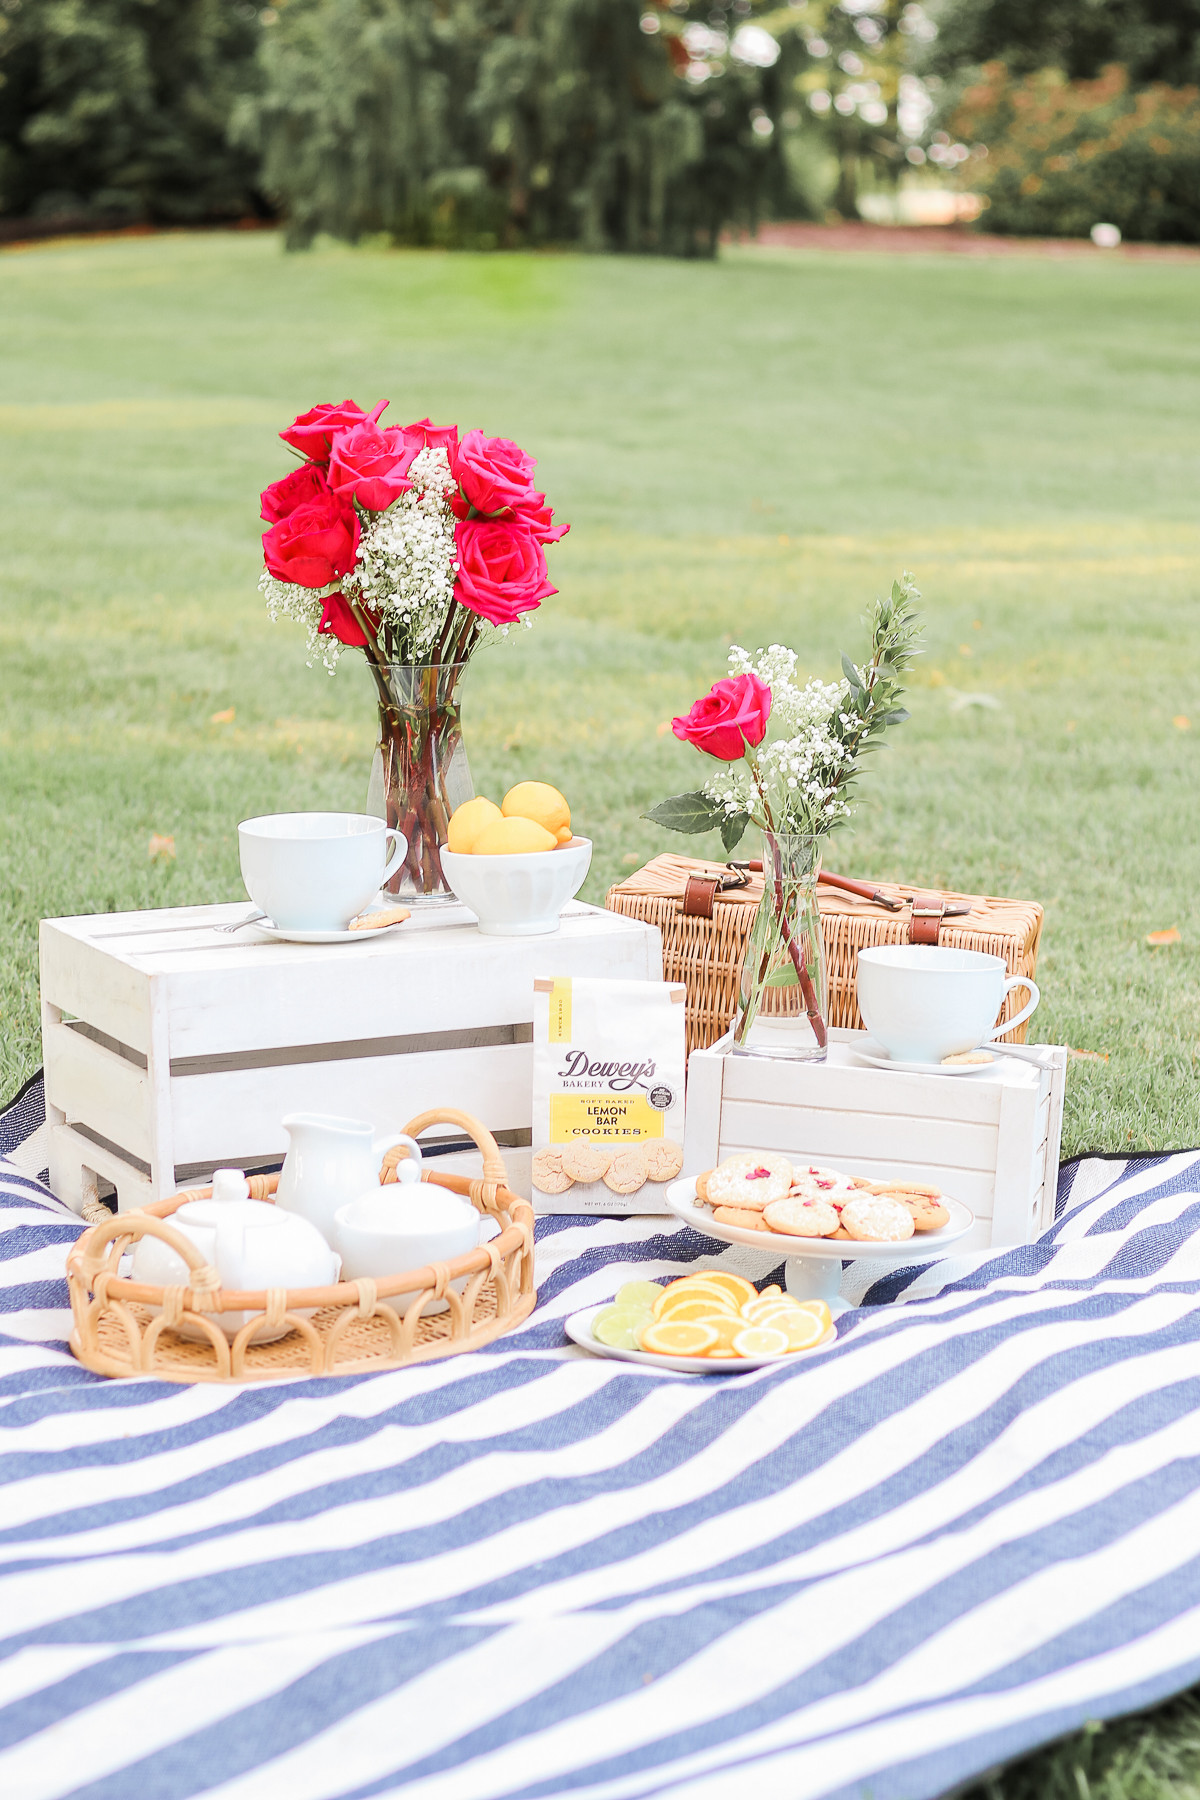 Summer Afternoon Tea Party Ideas
 The Perfect Afternoon Tea Picnic Spread